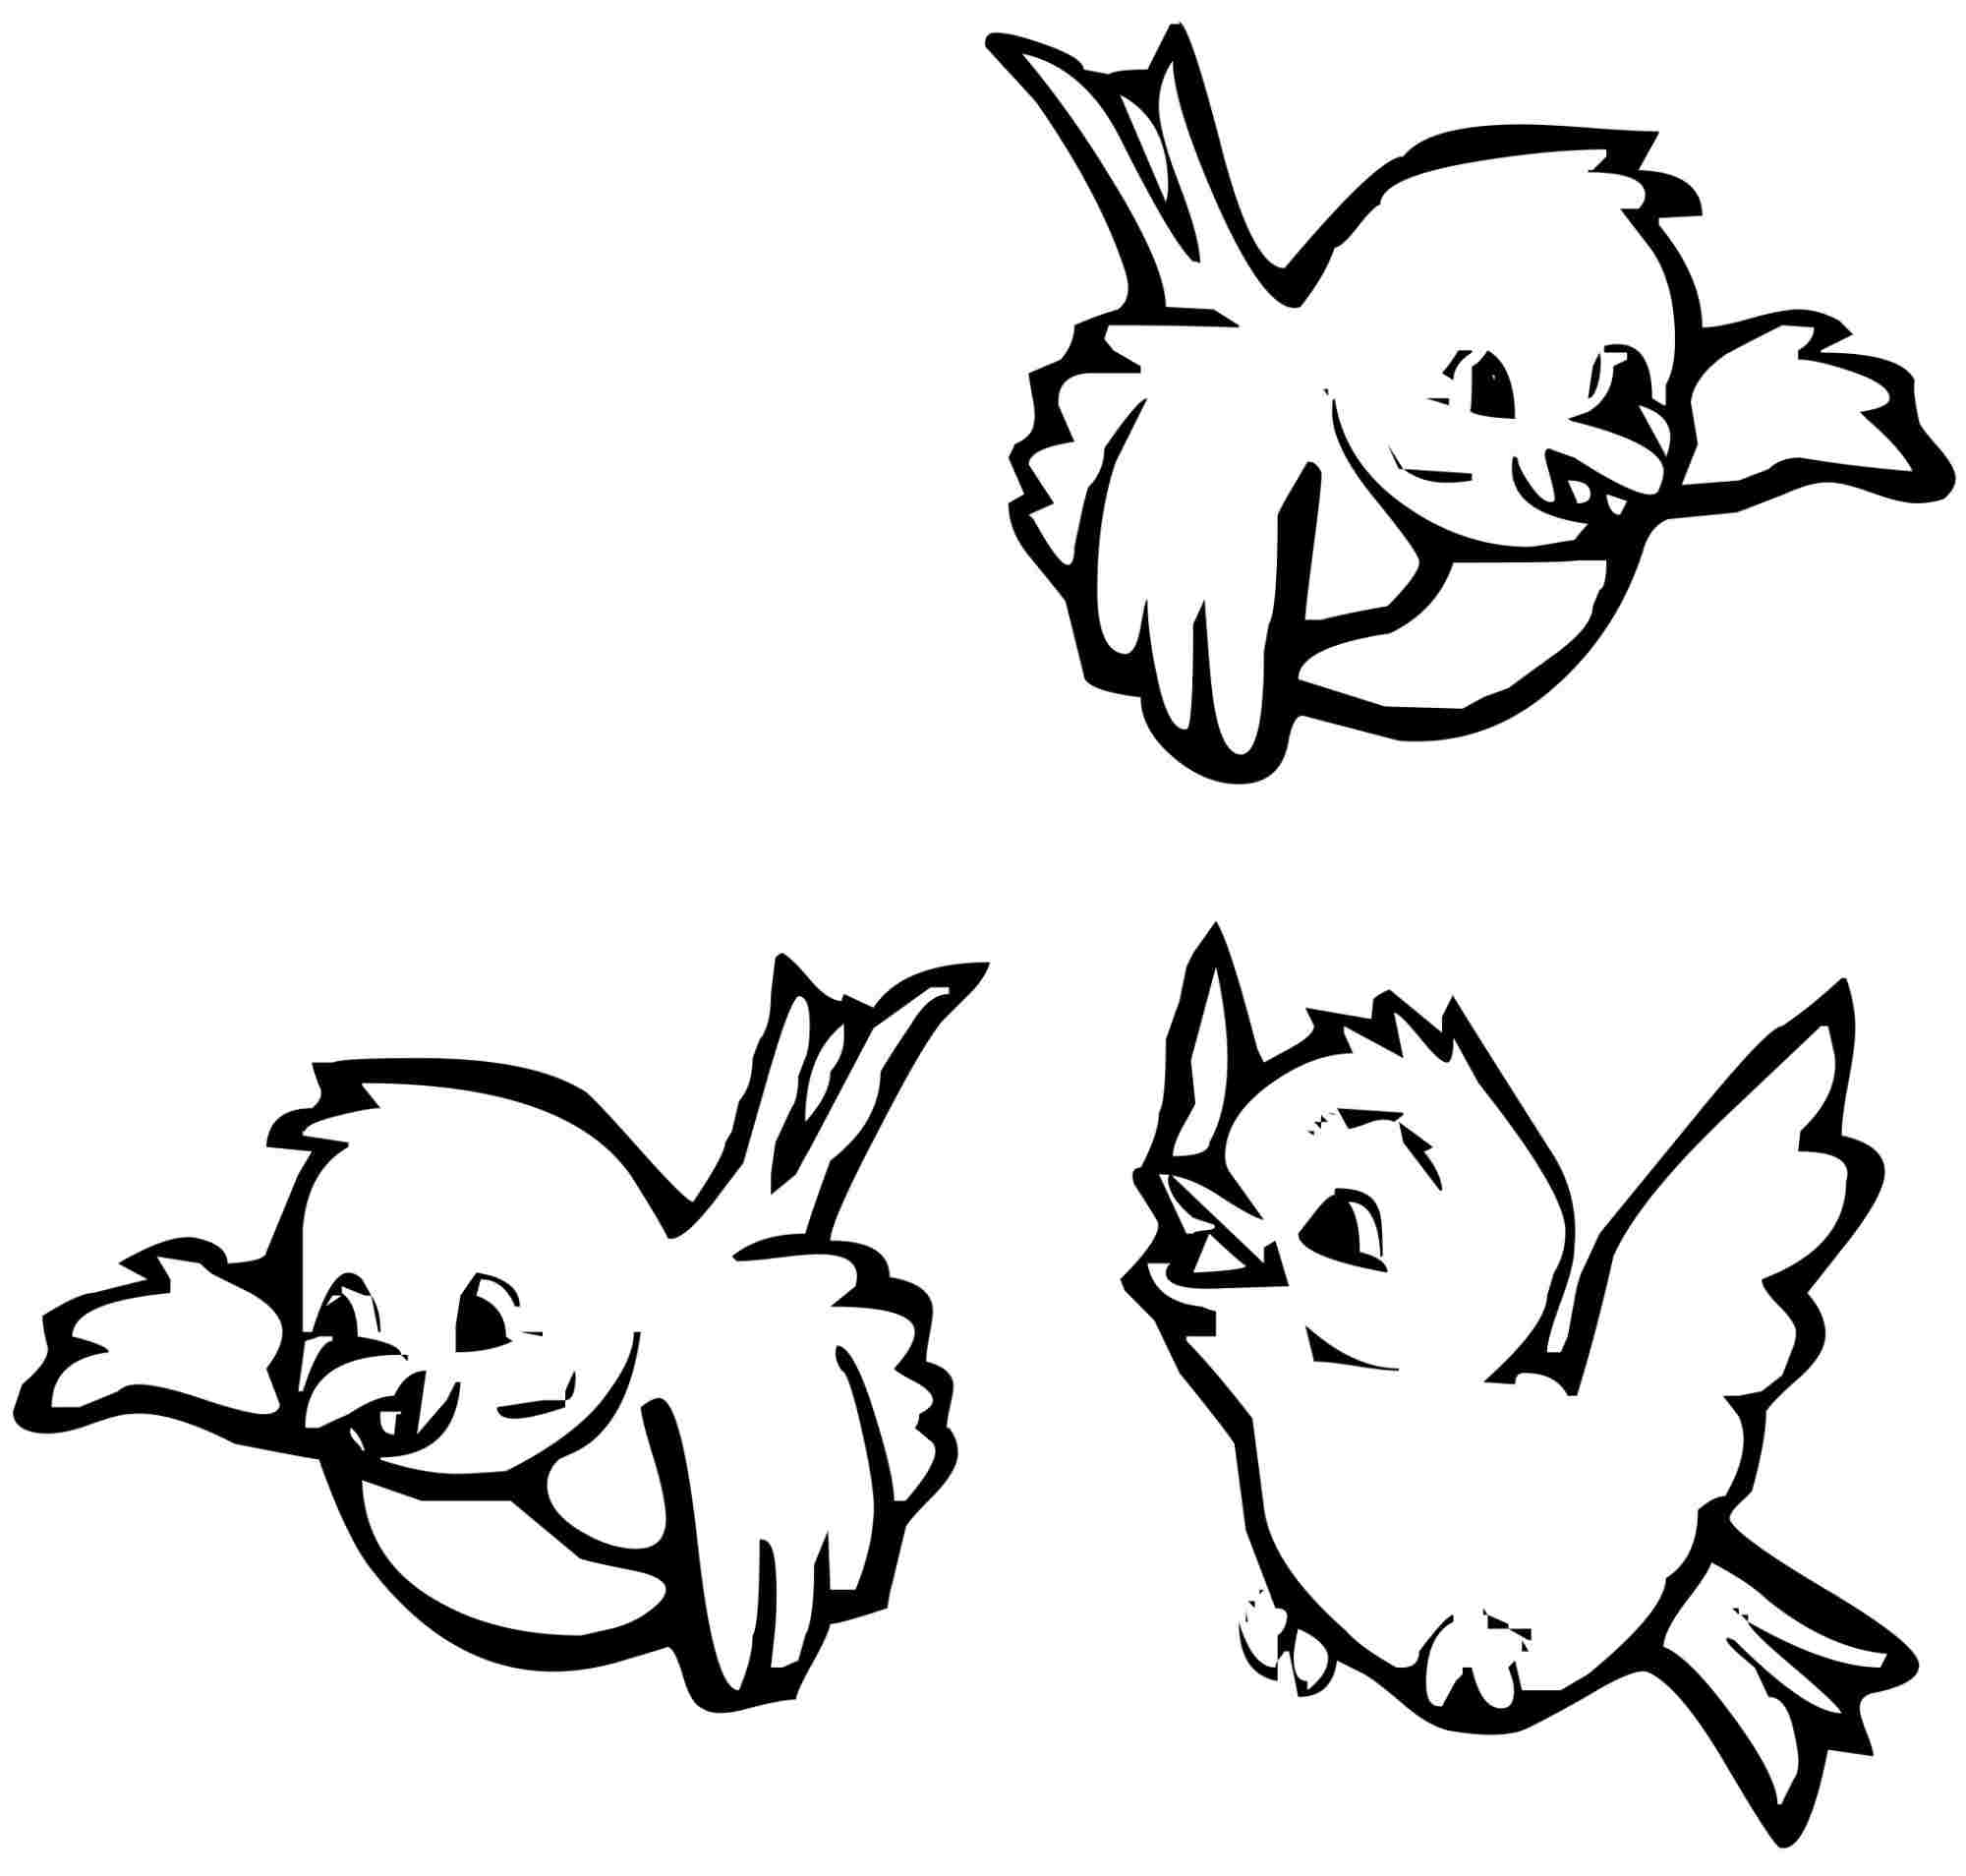 5 Best Images of Printable Bird Coloring Pages Free Printable Adult